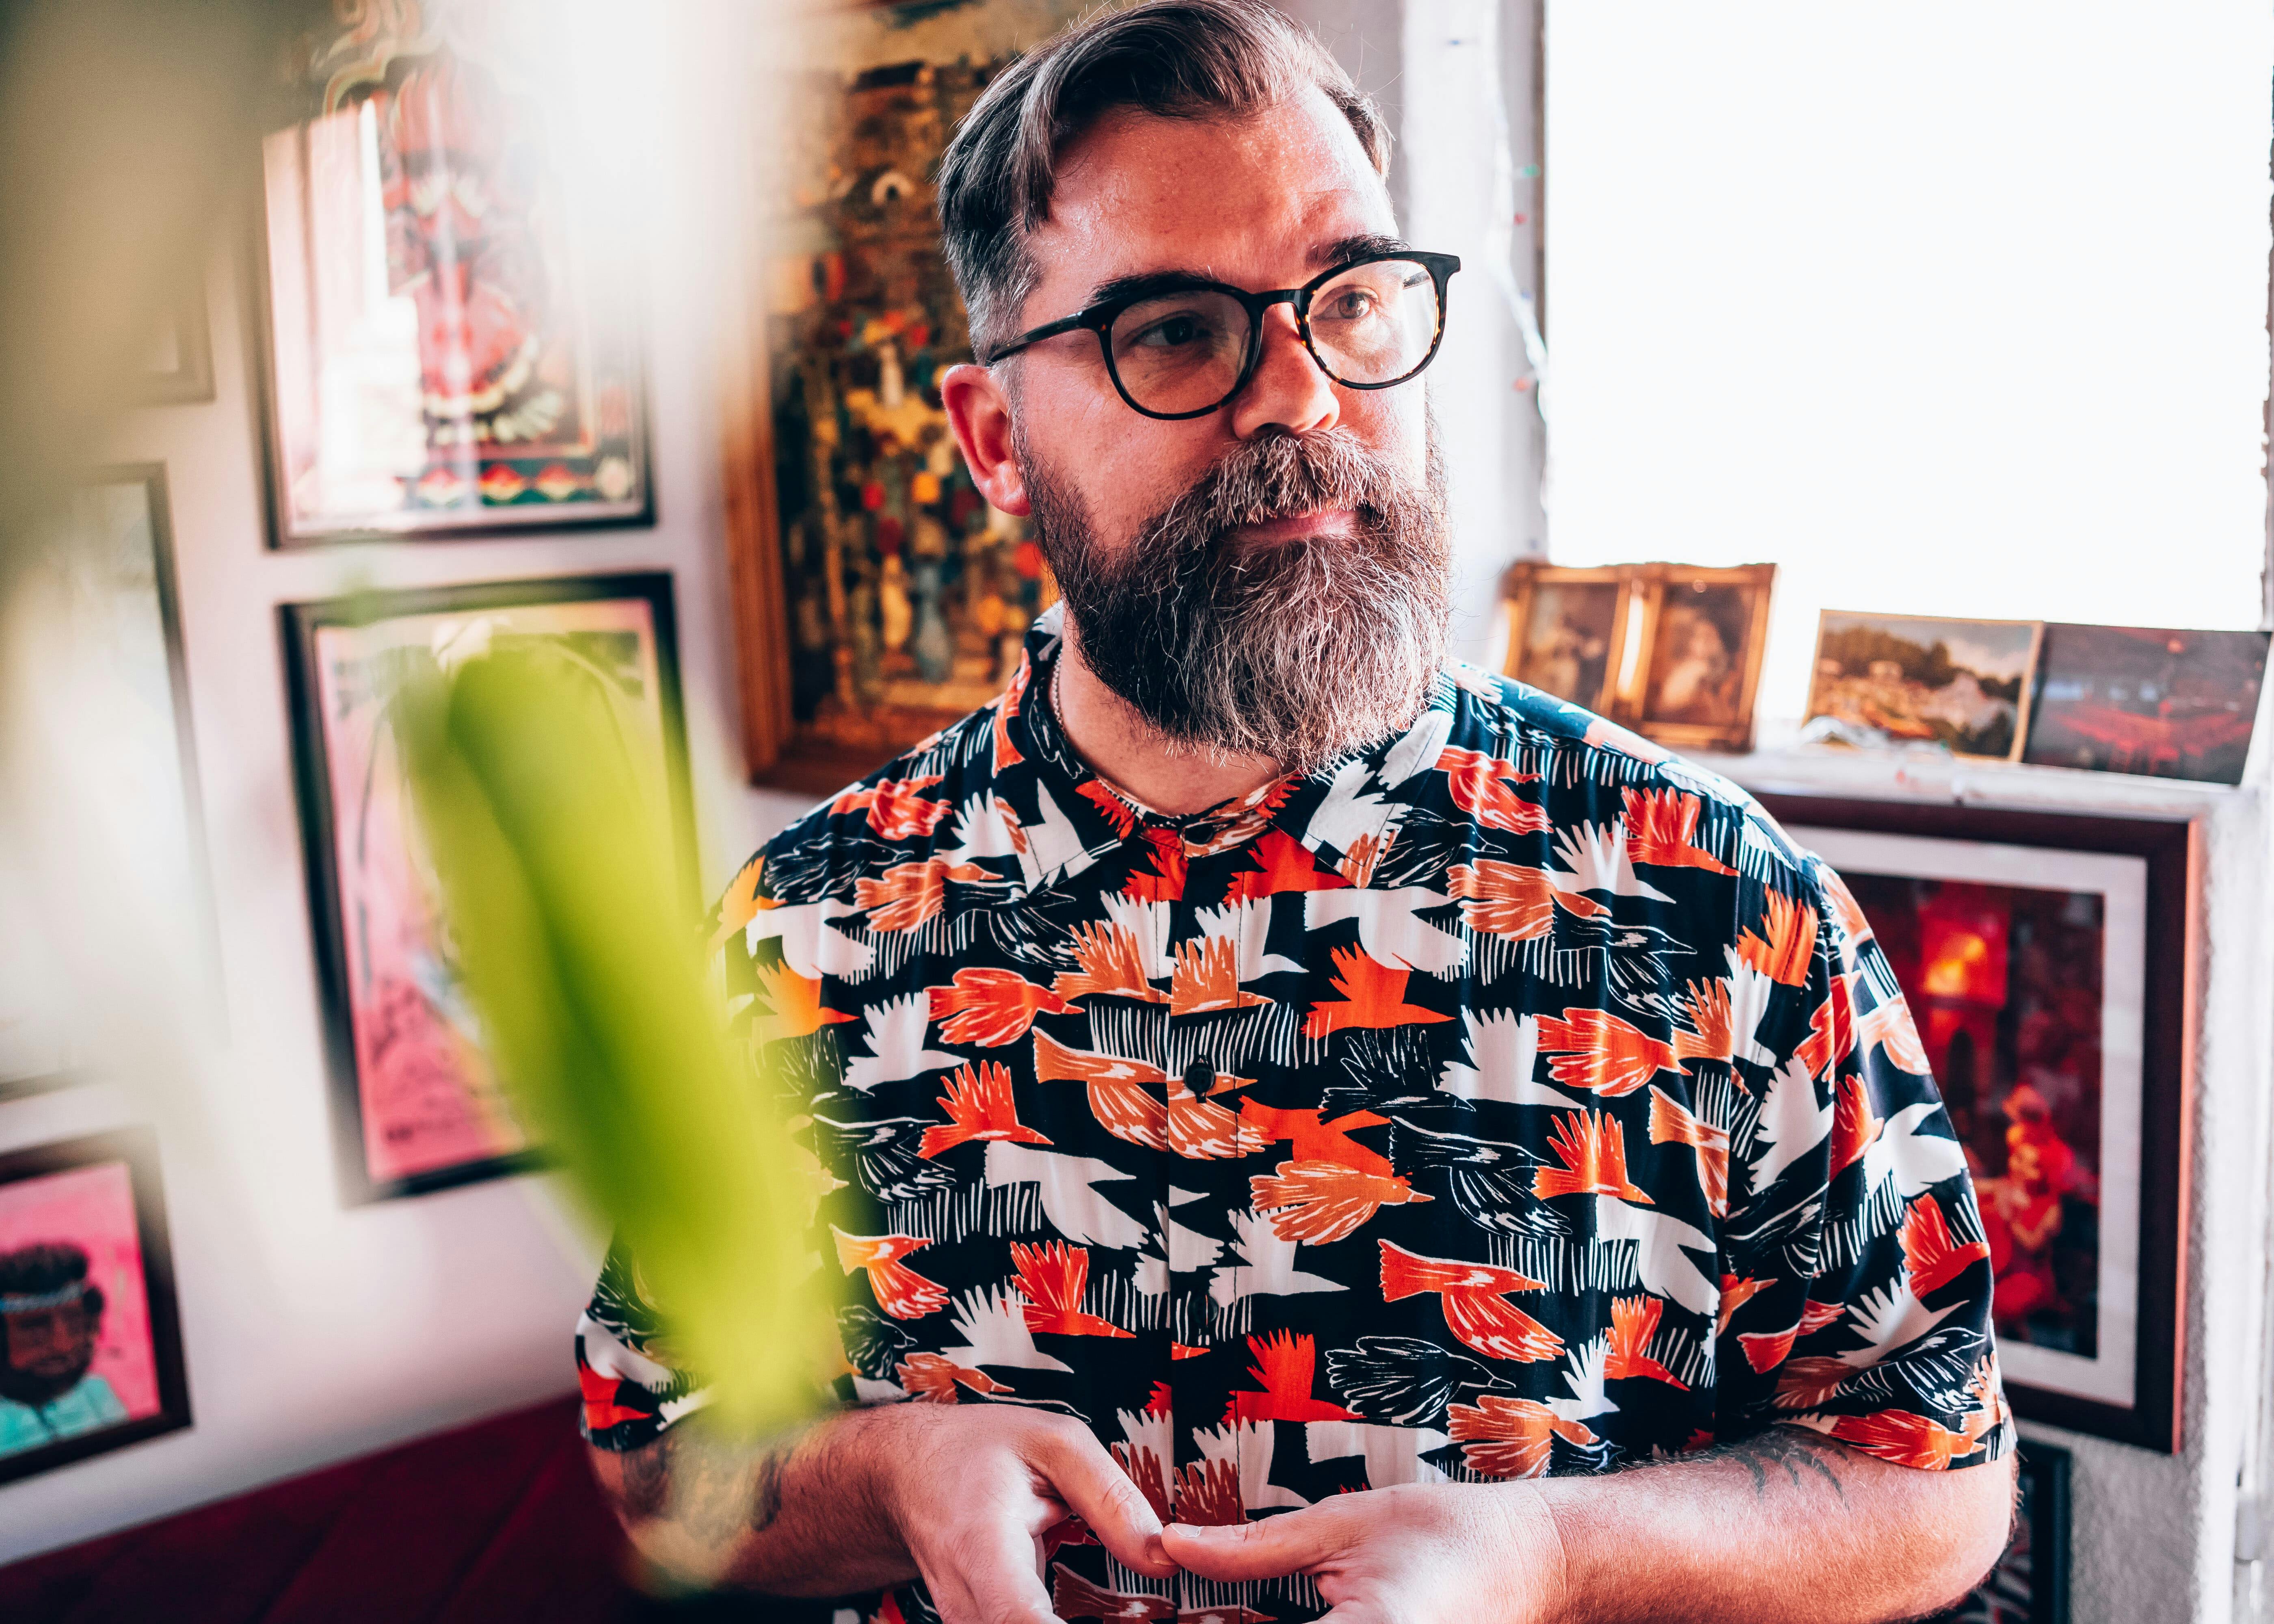 Man in glasses wearing a shirt with a vibrant nature-themed print, looking to the side, with old records displayed on the wall behind him.